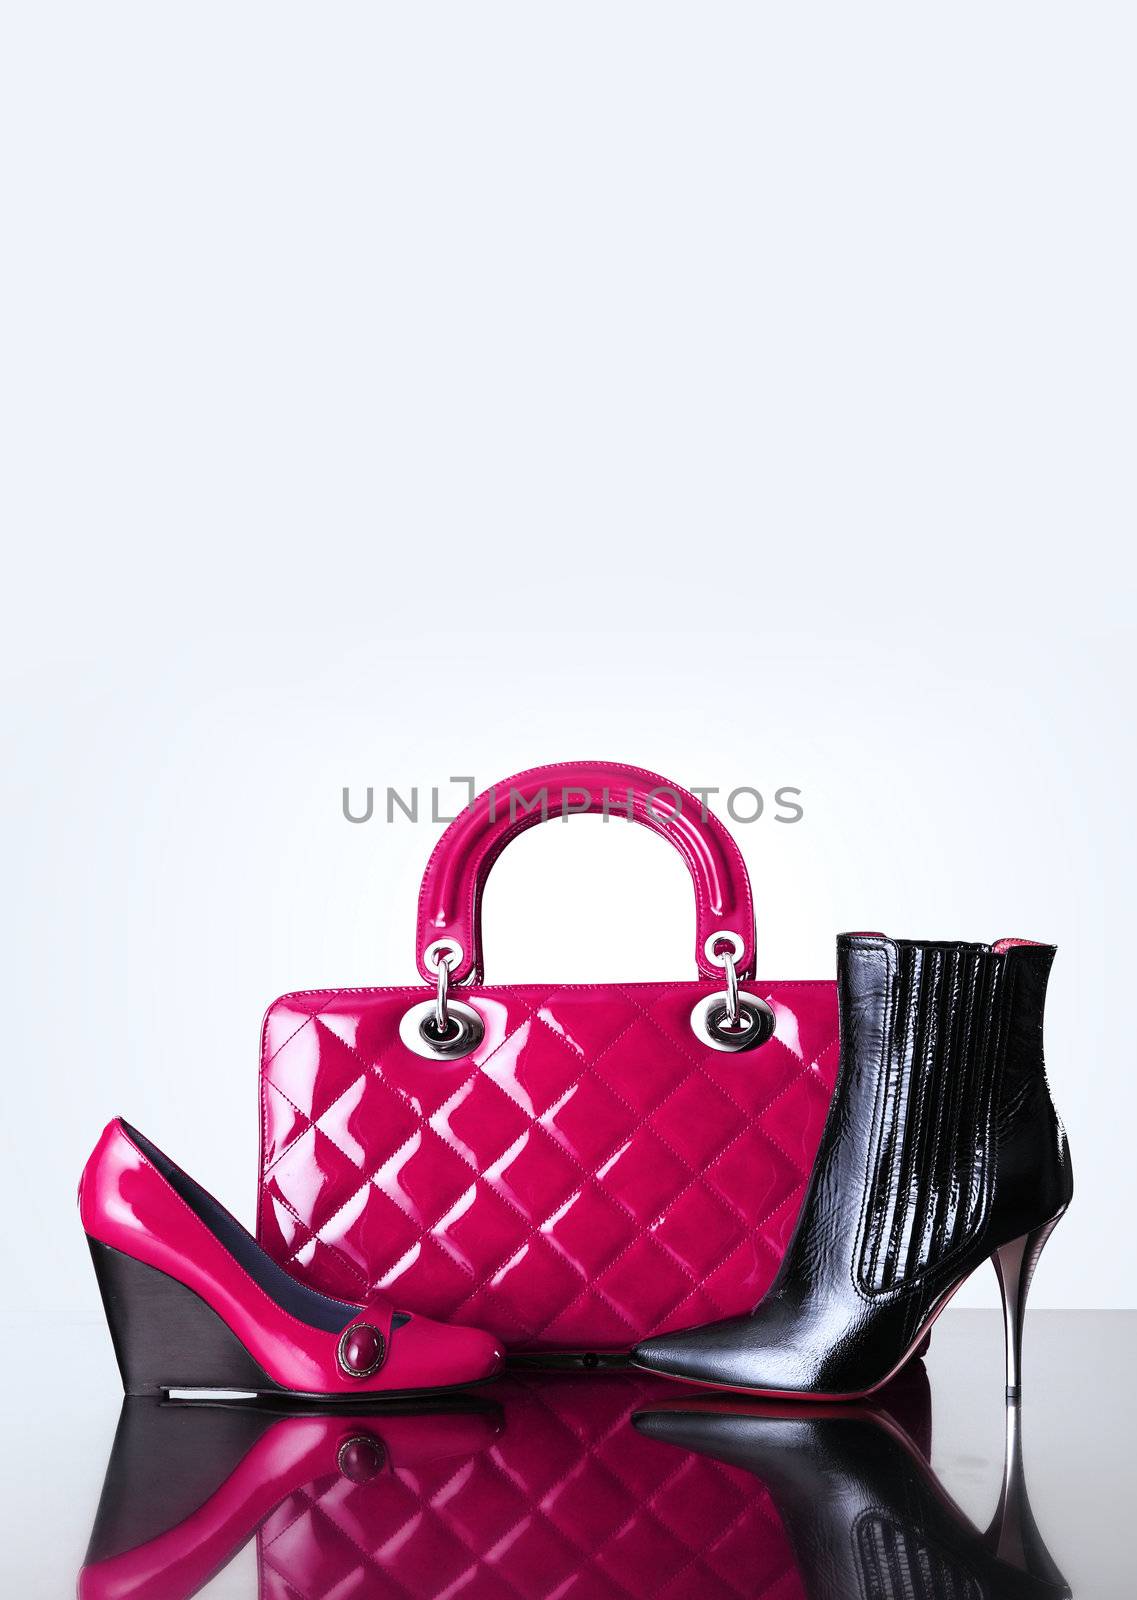 shoes and handbag,  fashion photo by stokkete